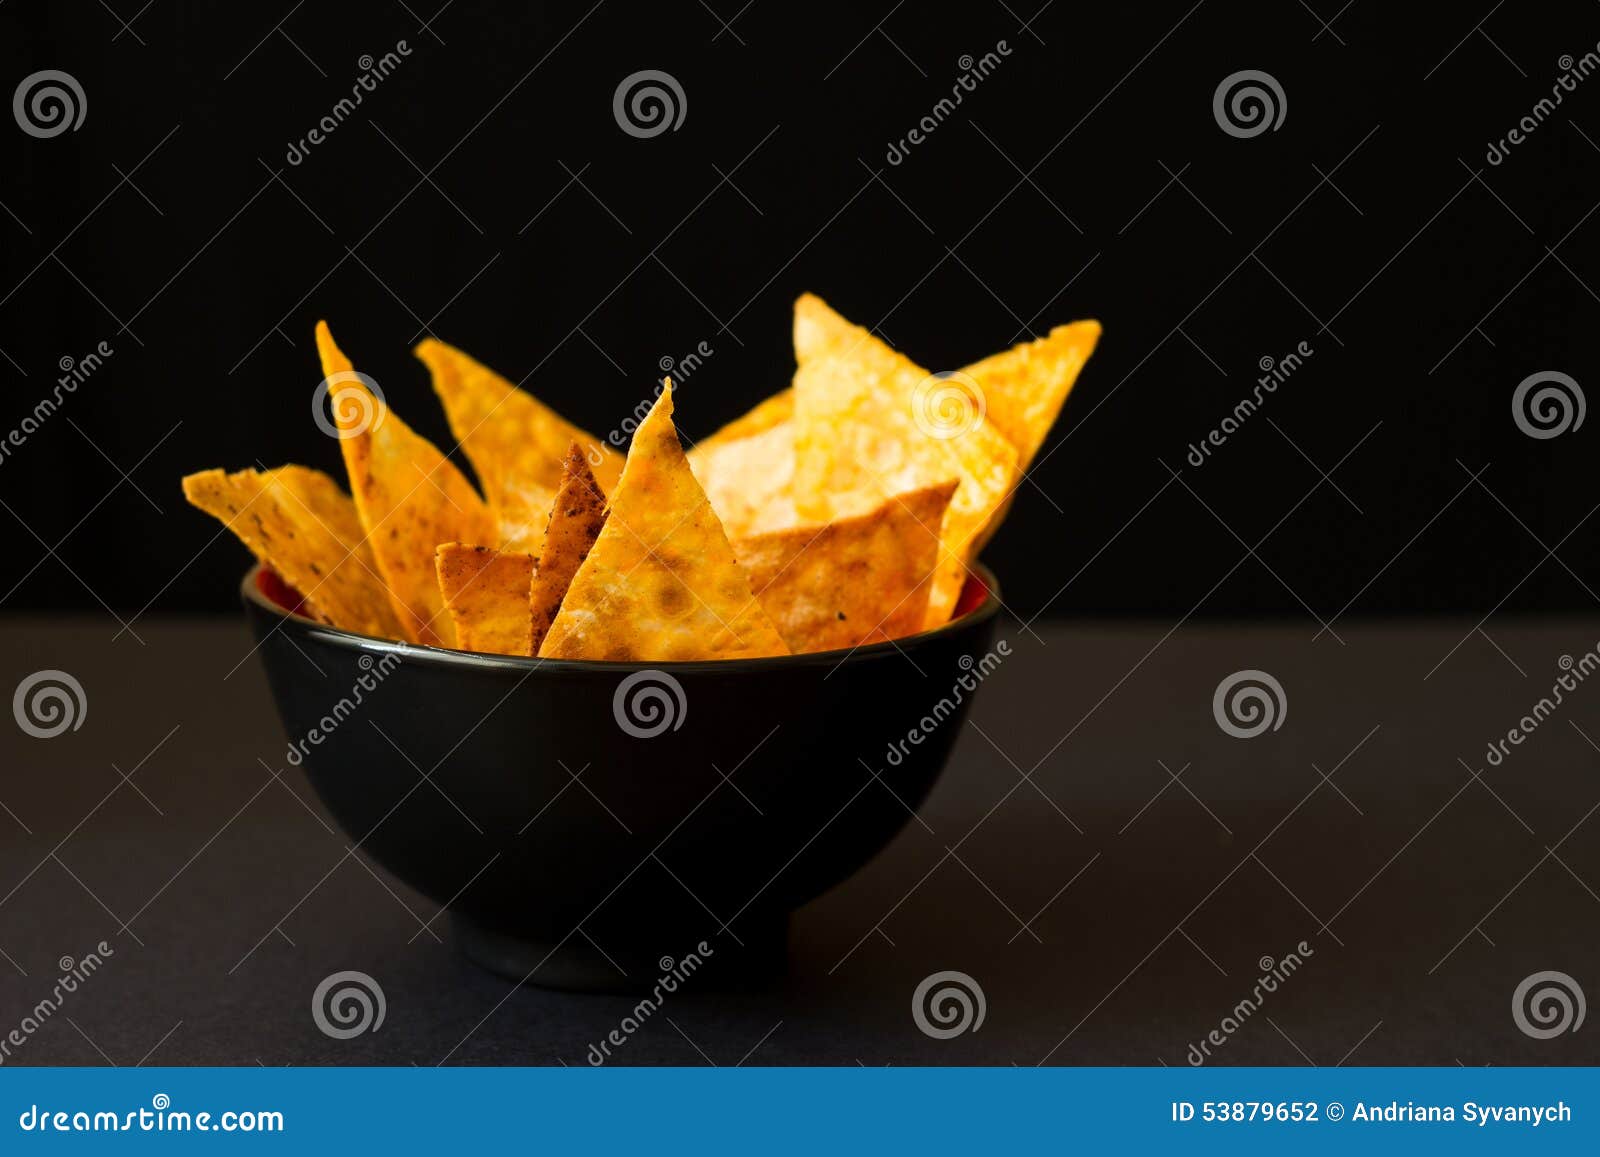 Fried spicy lavash chips in black tureen. Fried spicy golden lavash chips in black tureen